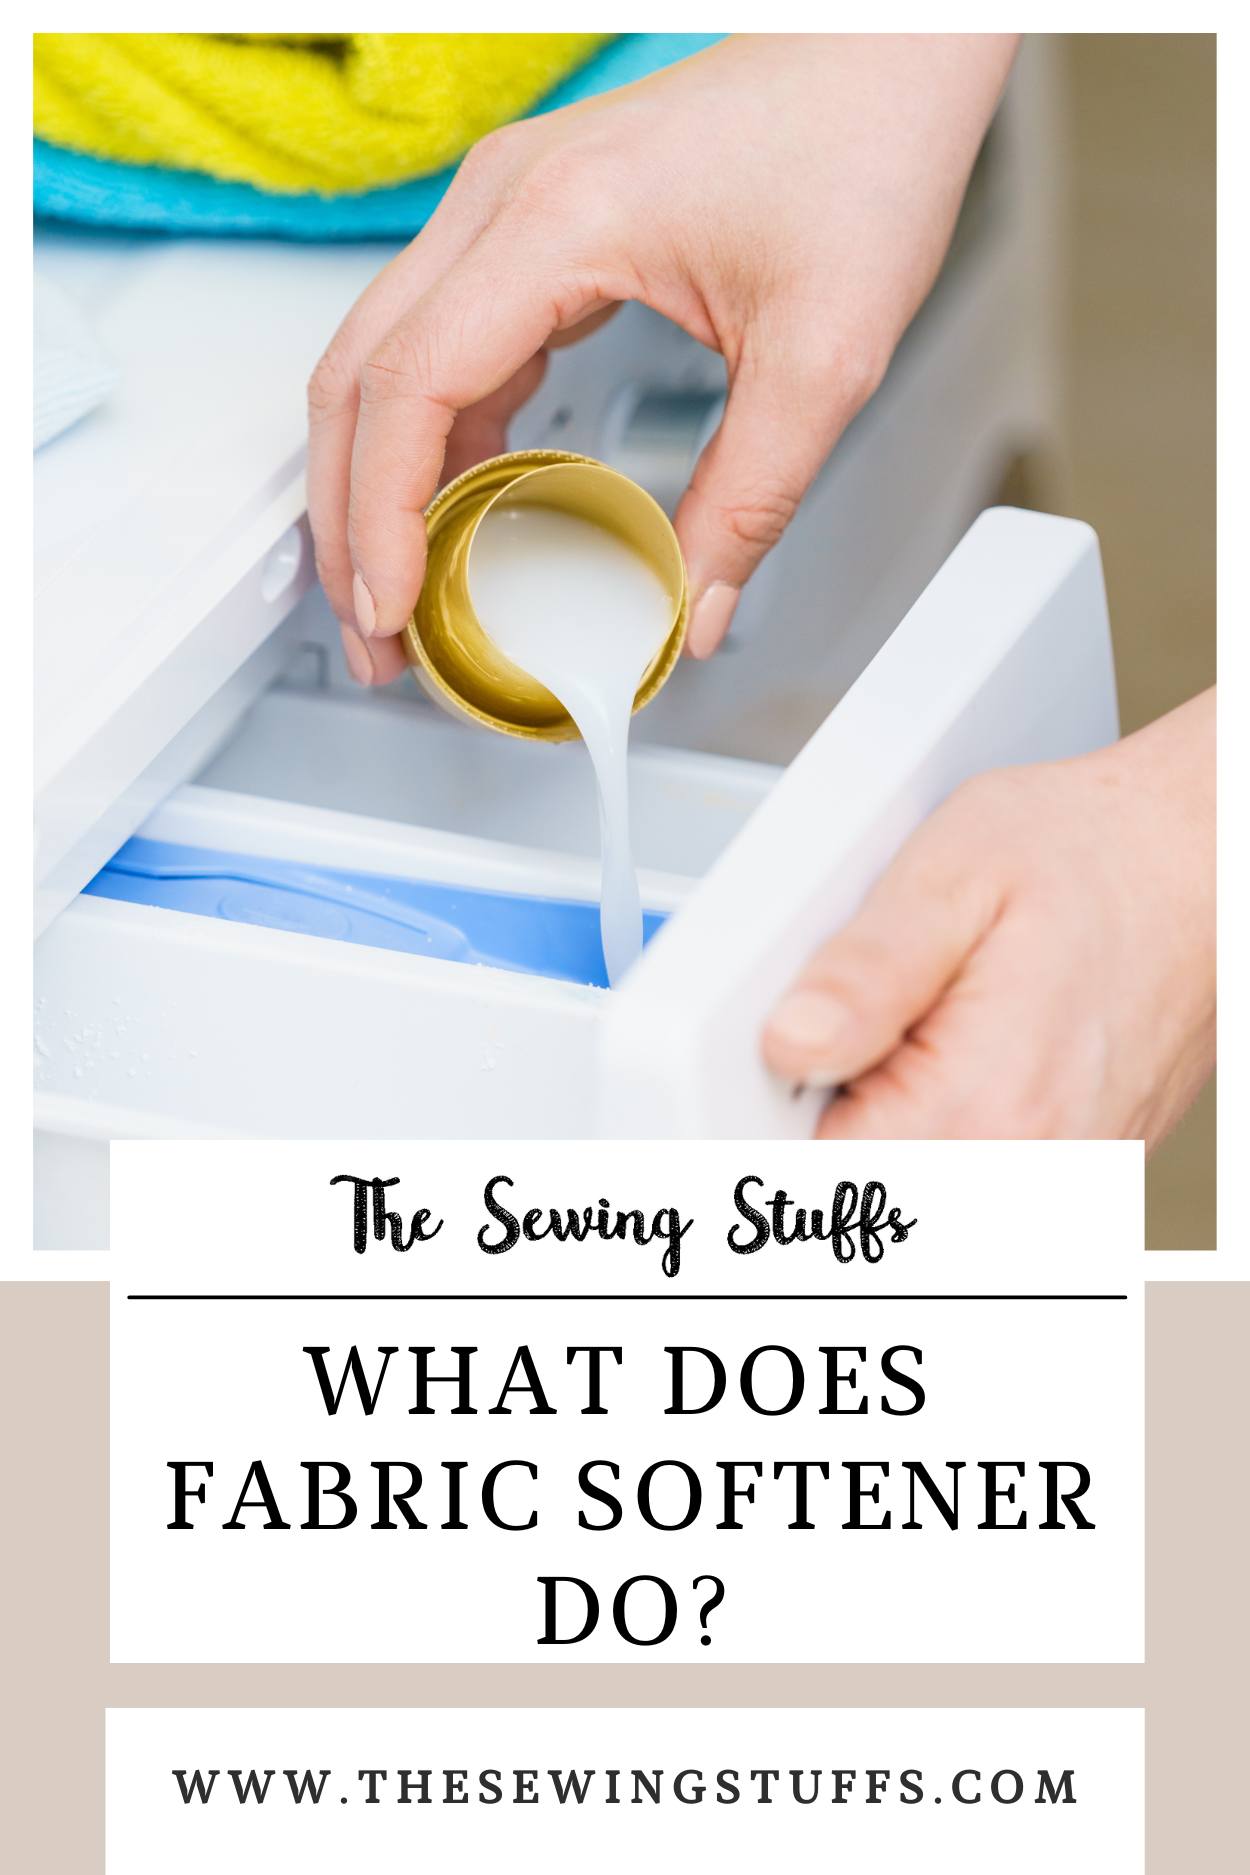 What Does Fabric Softener Do?